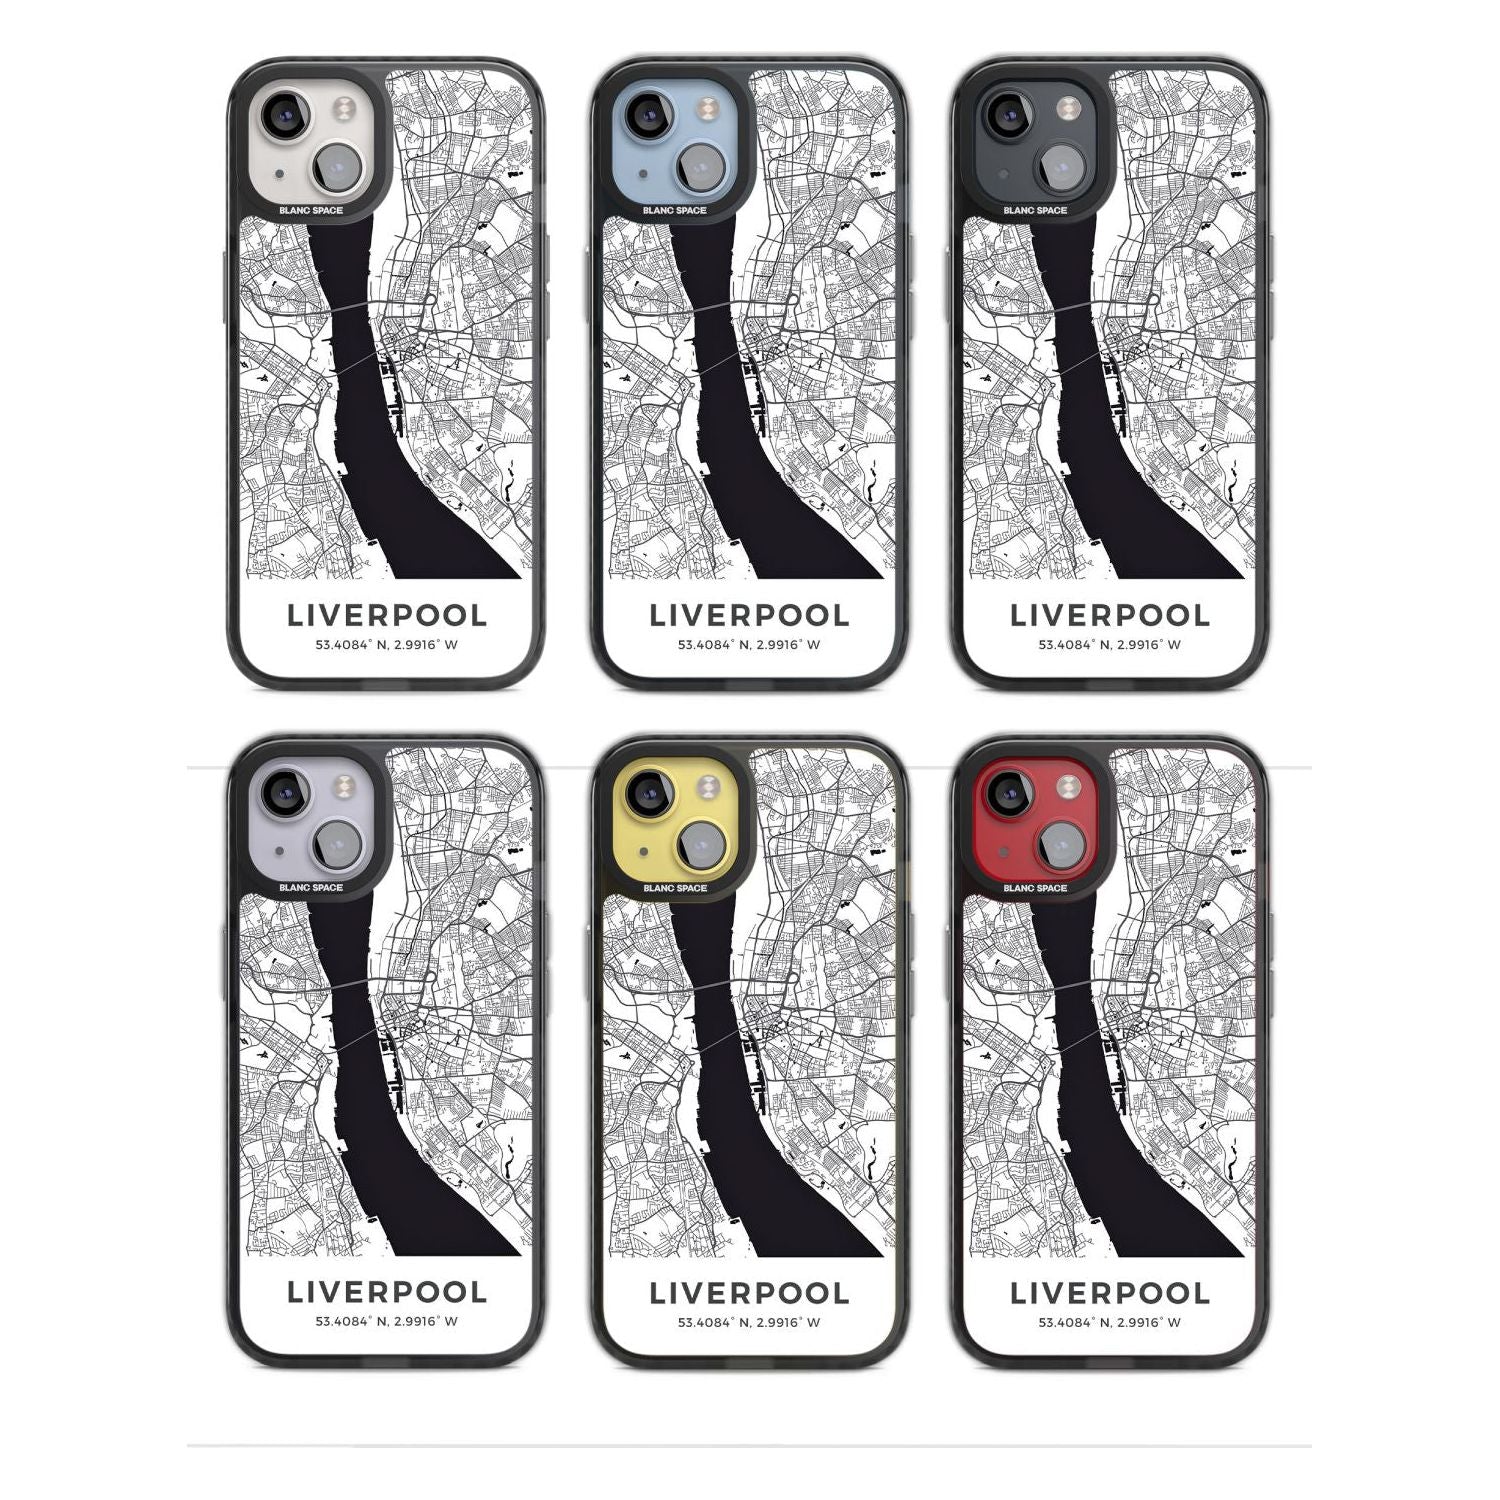 Map of Liverpool, England Phone Case iPhone 15 Pro Max / Black Impact Case,iPhone 15 Plus / Black Impact Case,iPhone 15 Pro / Black Impact Case,iPhone 15 / Black Impact Case,iPhone 15 Pro Max / Impact Case,iPhone 15 Plus / Impact Case,iPhone 15 Pro / Impact Case,iPhone 15 / Impact Case,iPhone 15 Pro Max / Magsafe Black Impact Case,iPhone 15 Plus / Magsafe Black Impact Case,iPhone 15 Pro / Magsafe Black Impact Case,iPhone 15 / Magsafe Black Impact Case,iPhone 14 Pro Max / Black Impact Case,iPhone 14 Plus / B